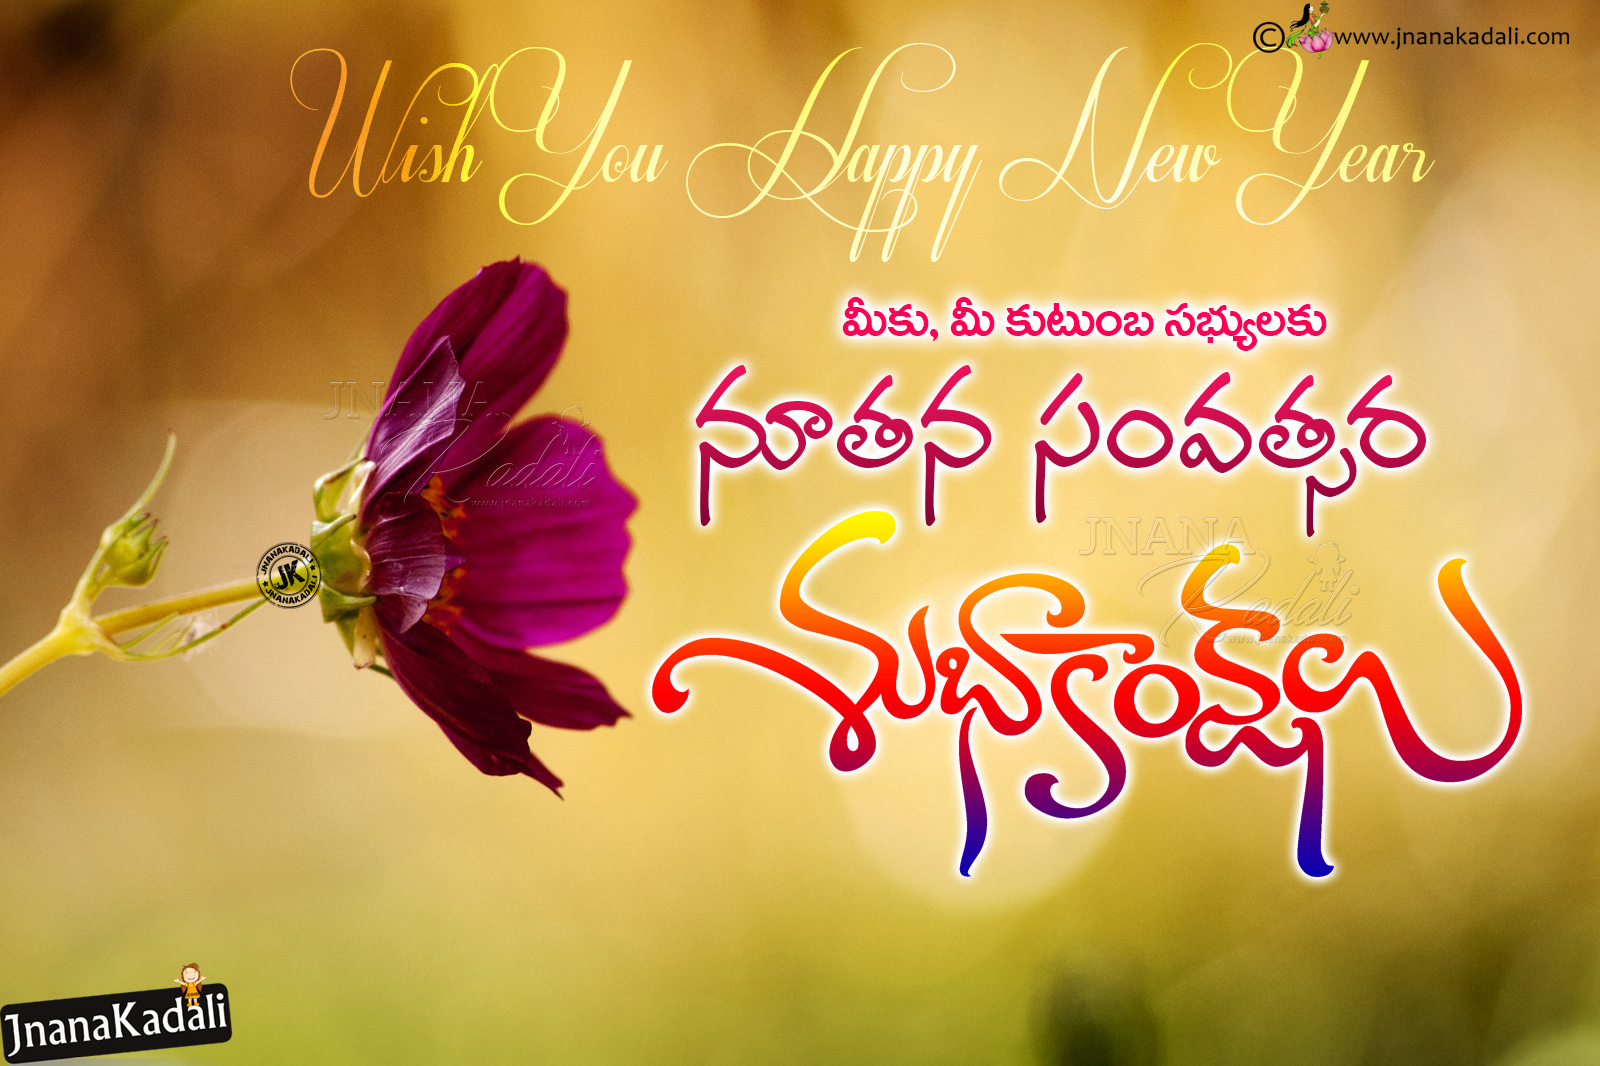 Happy New Year 2018 quotes Wishes in Telugu hd Pictures Greetings